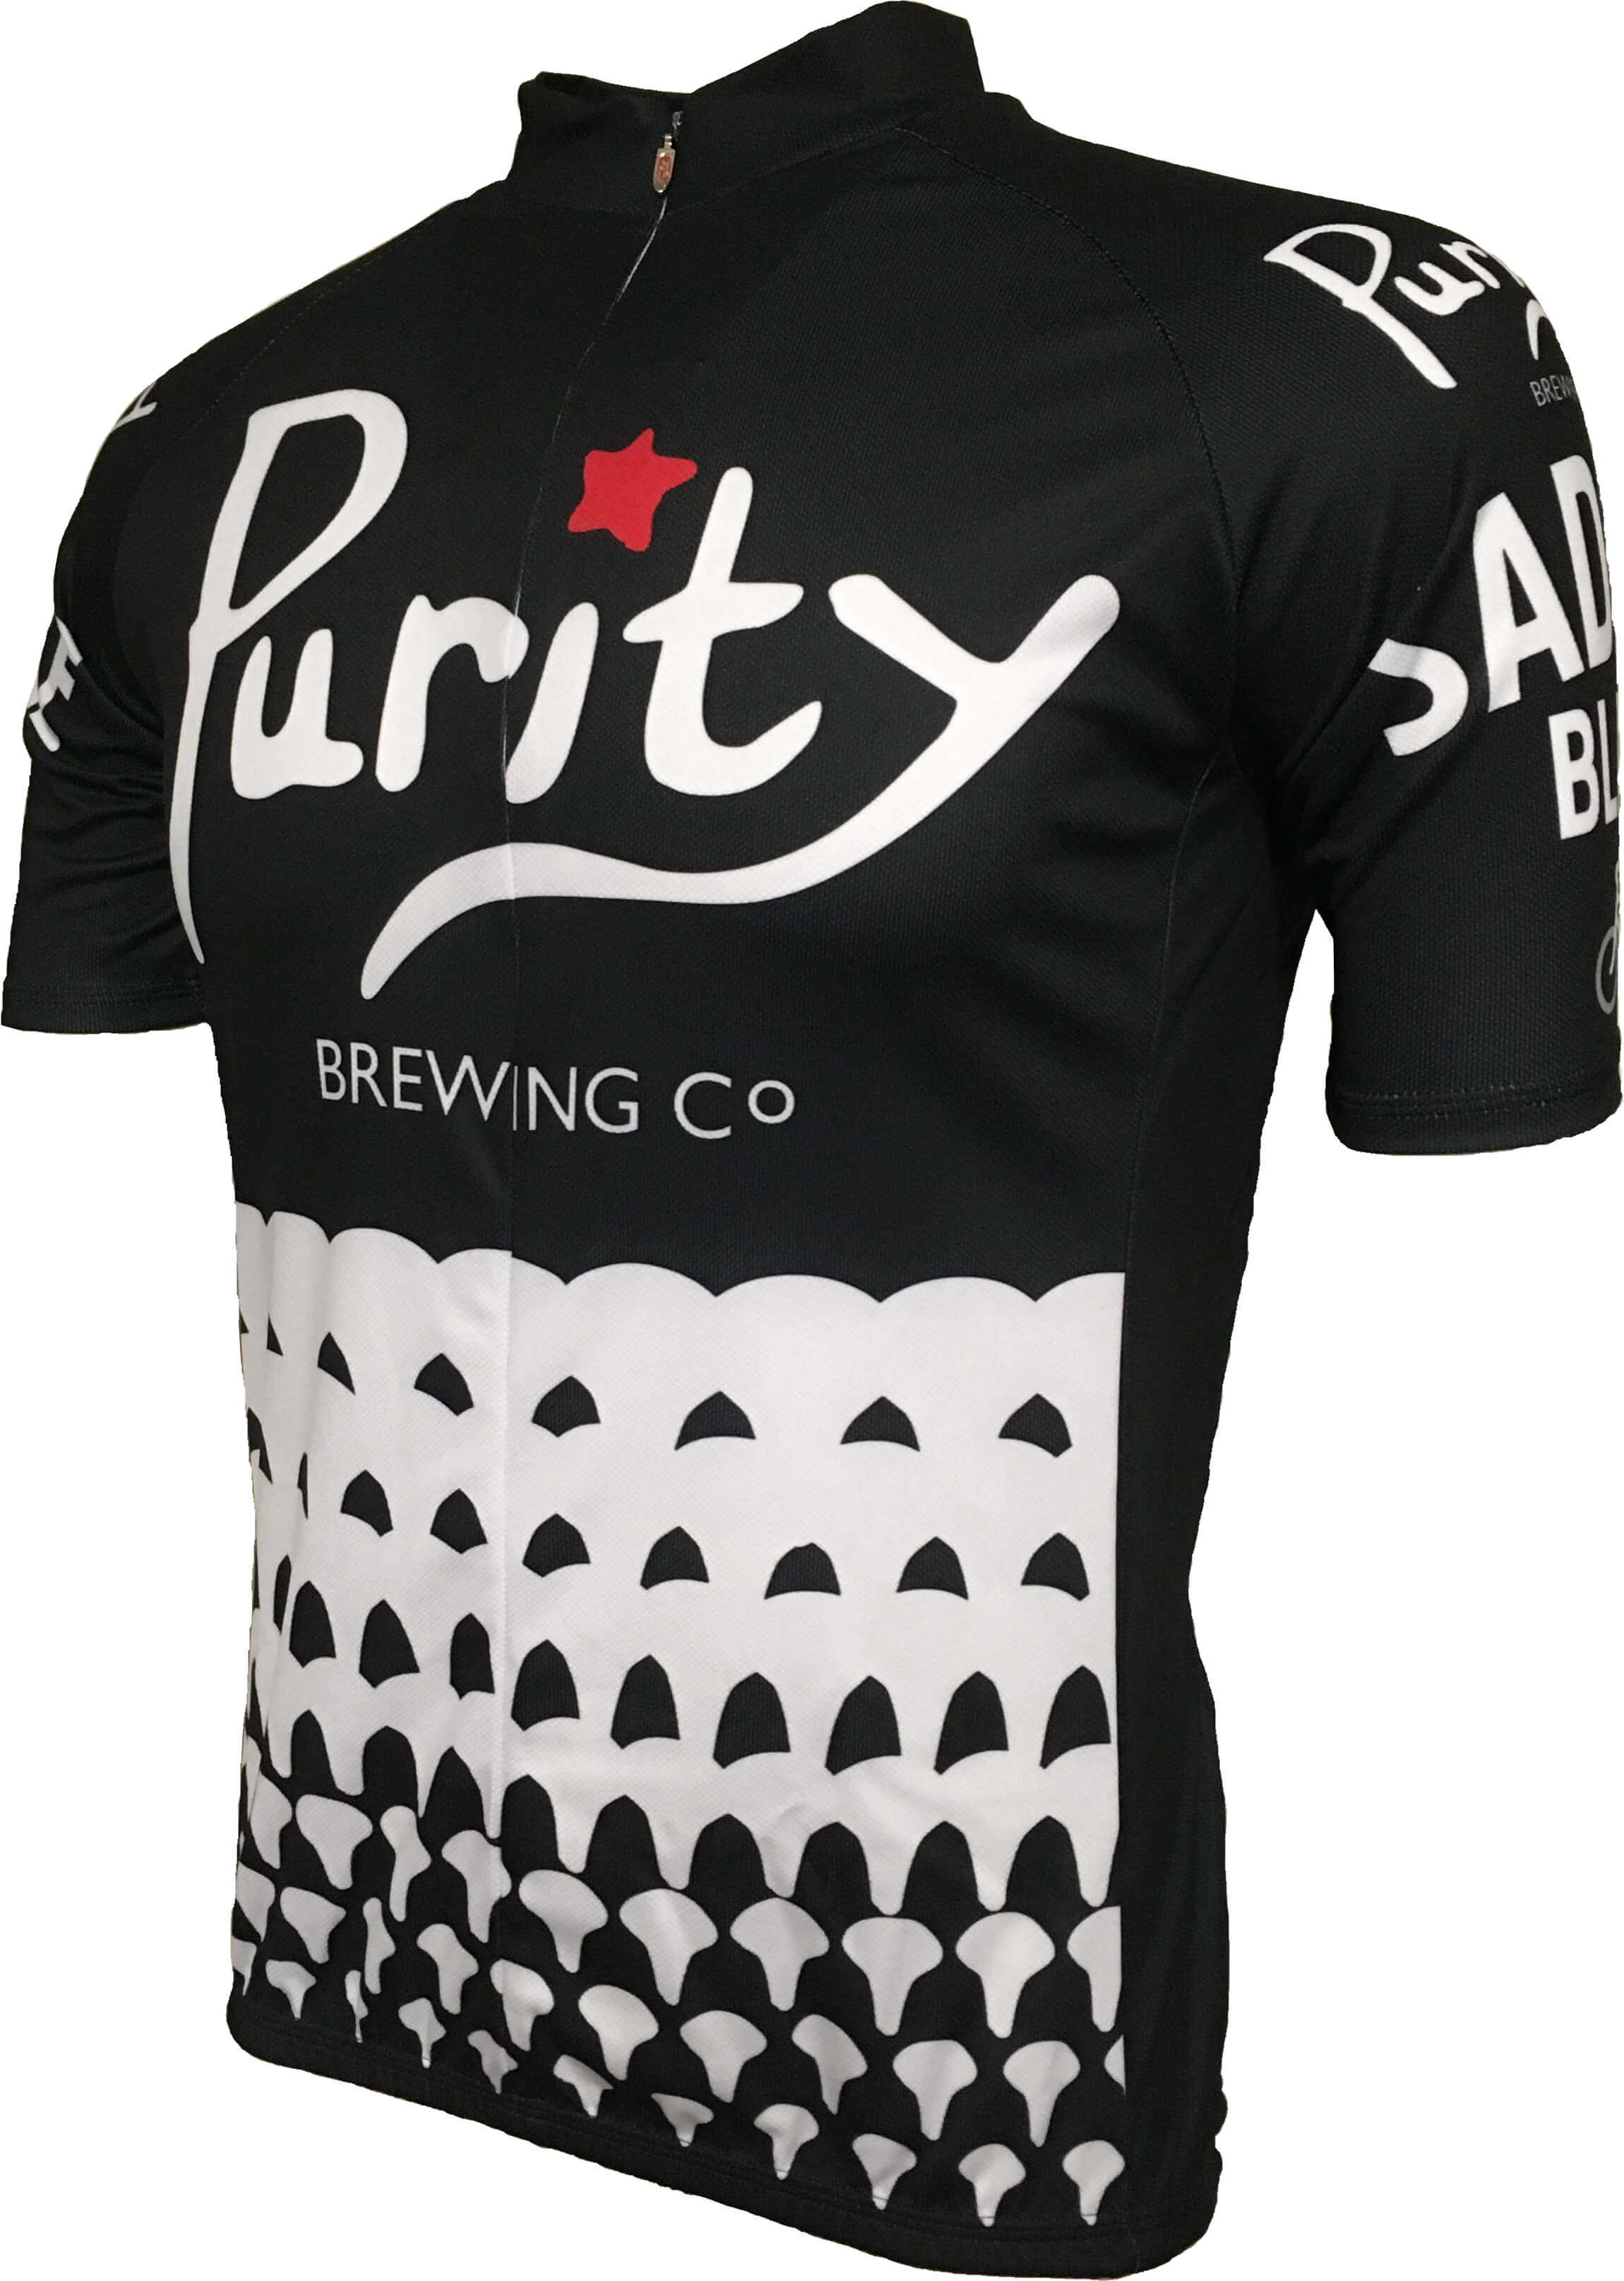 Purity Brewery Saddle Black Road jersey Front 